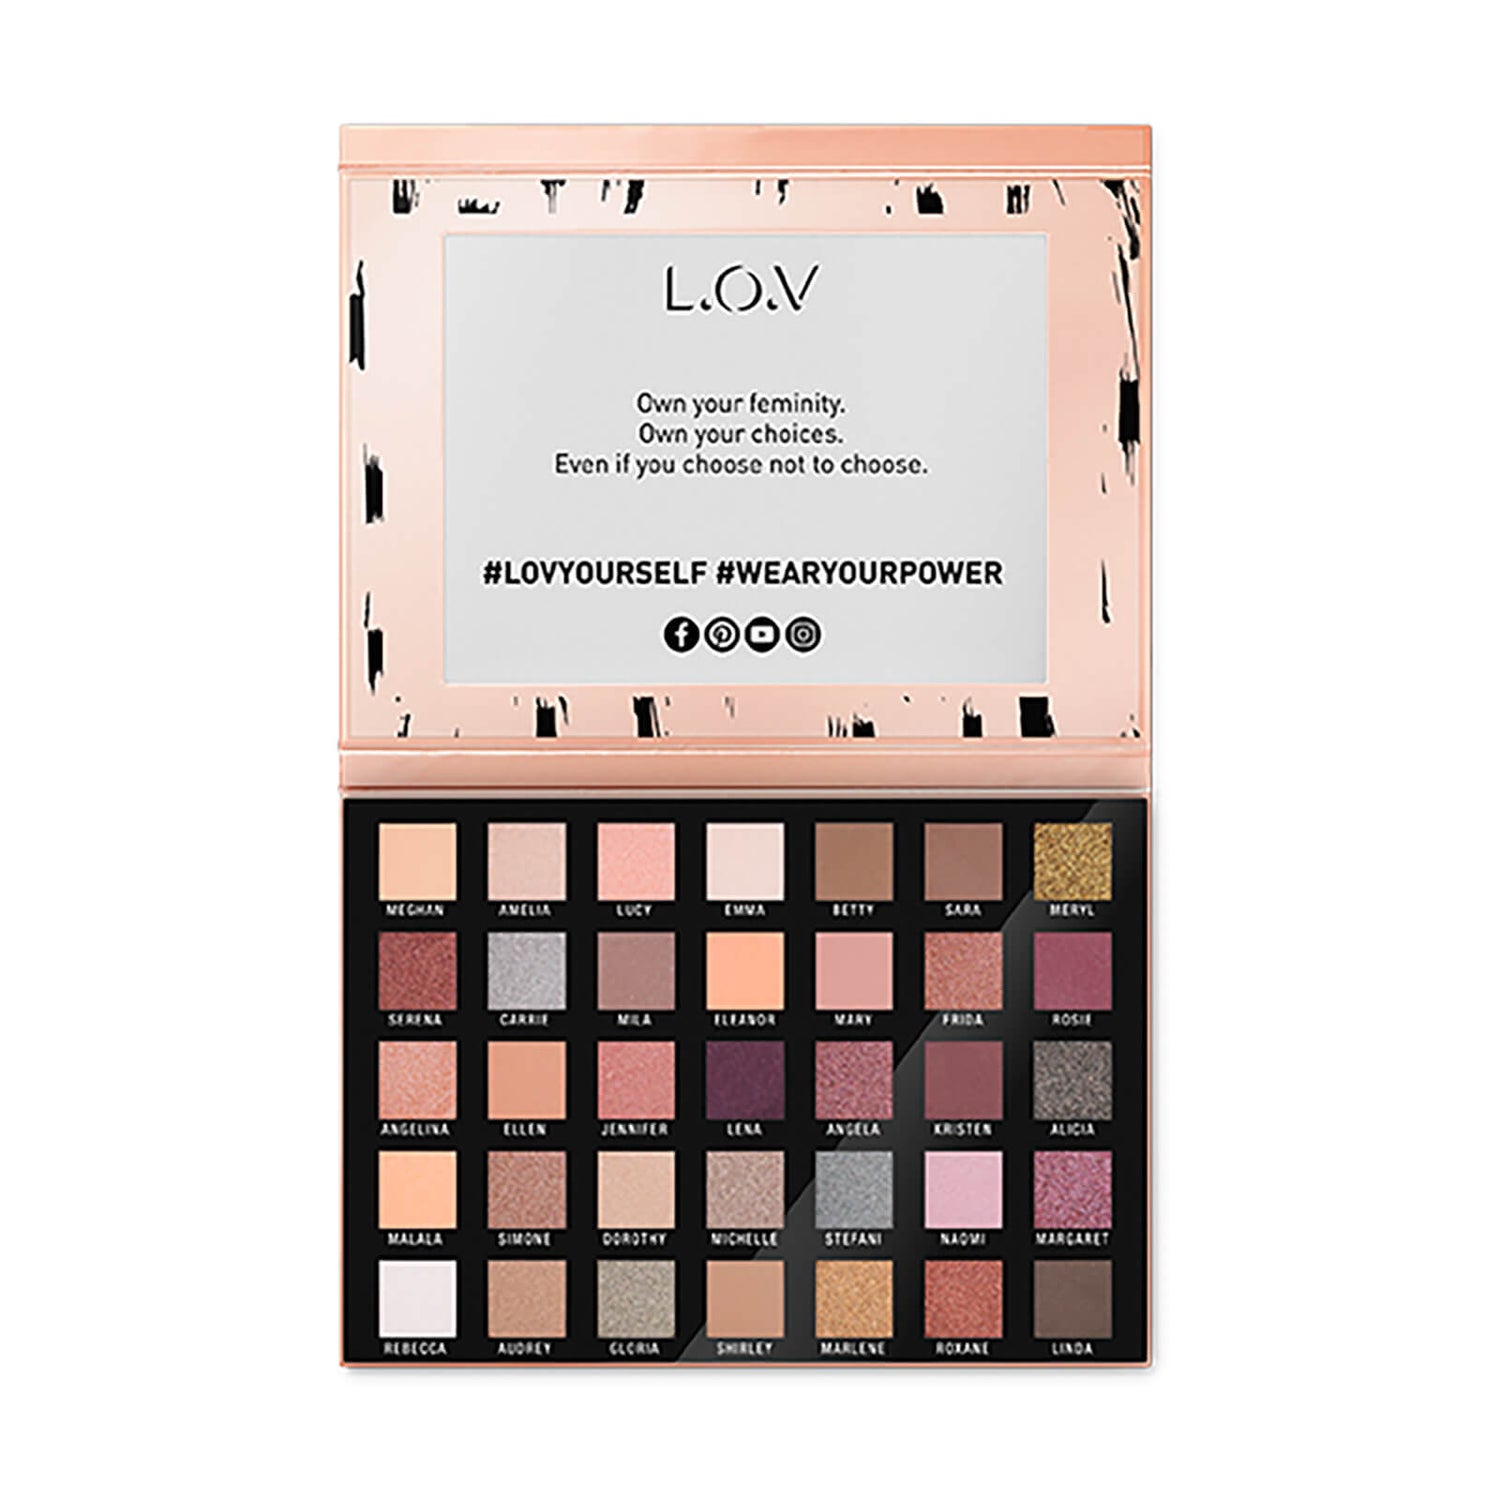 L.O.V The Choice Is All Yours! Eyeshadow Palette